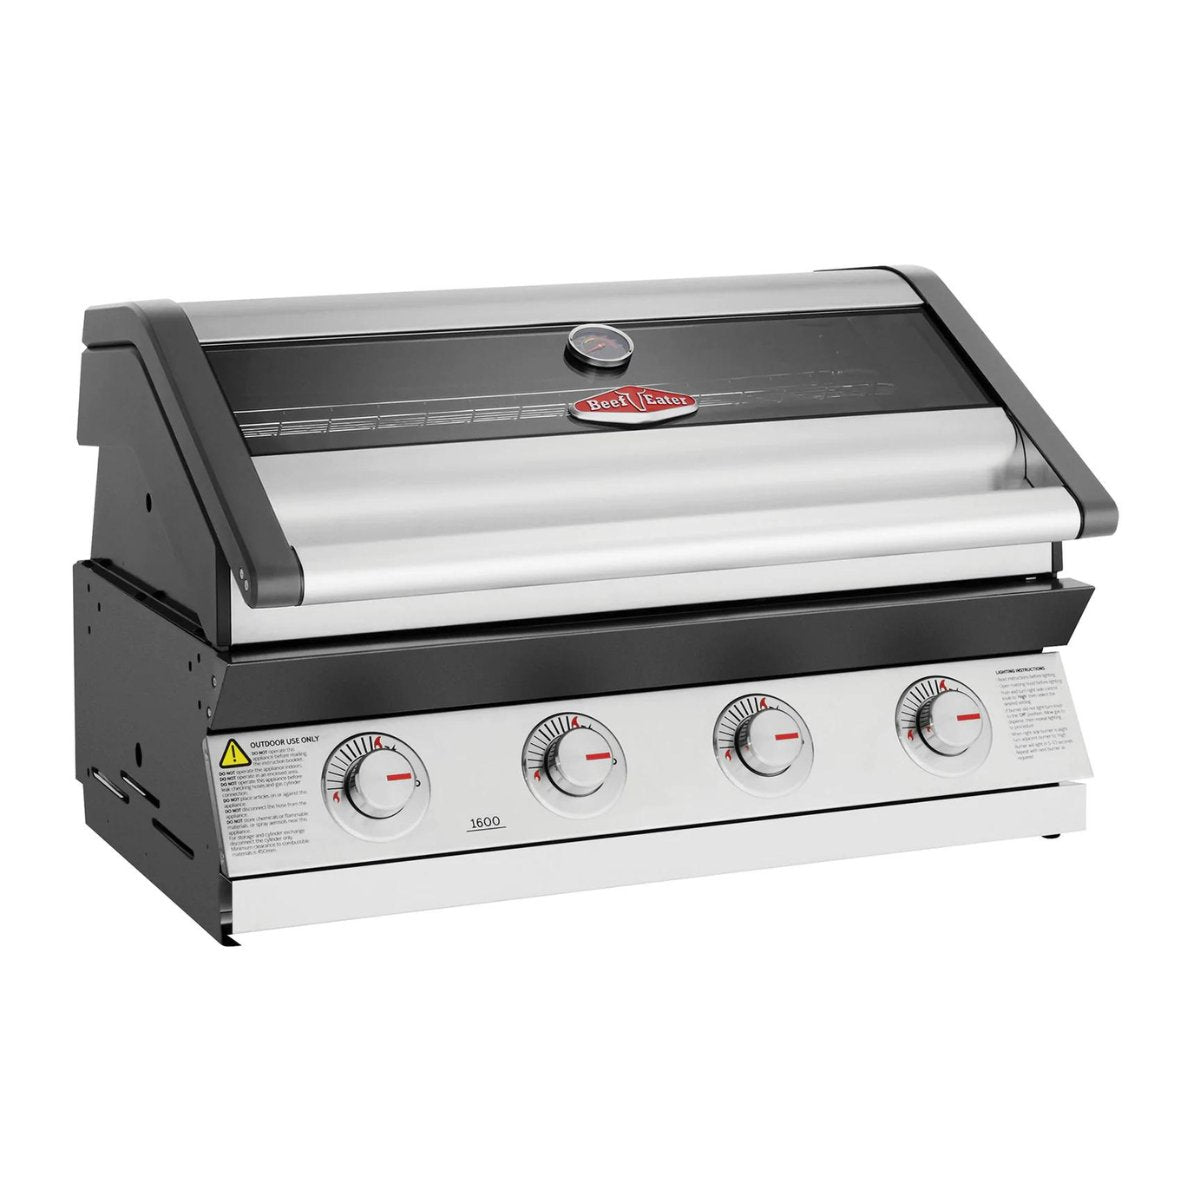 Beefeater 1600S 4 Burner Built-In Grill - Kitchen In The Garden